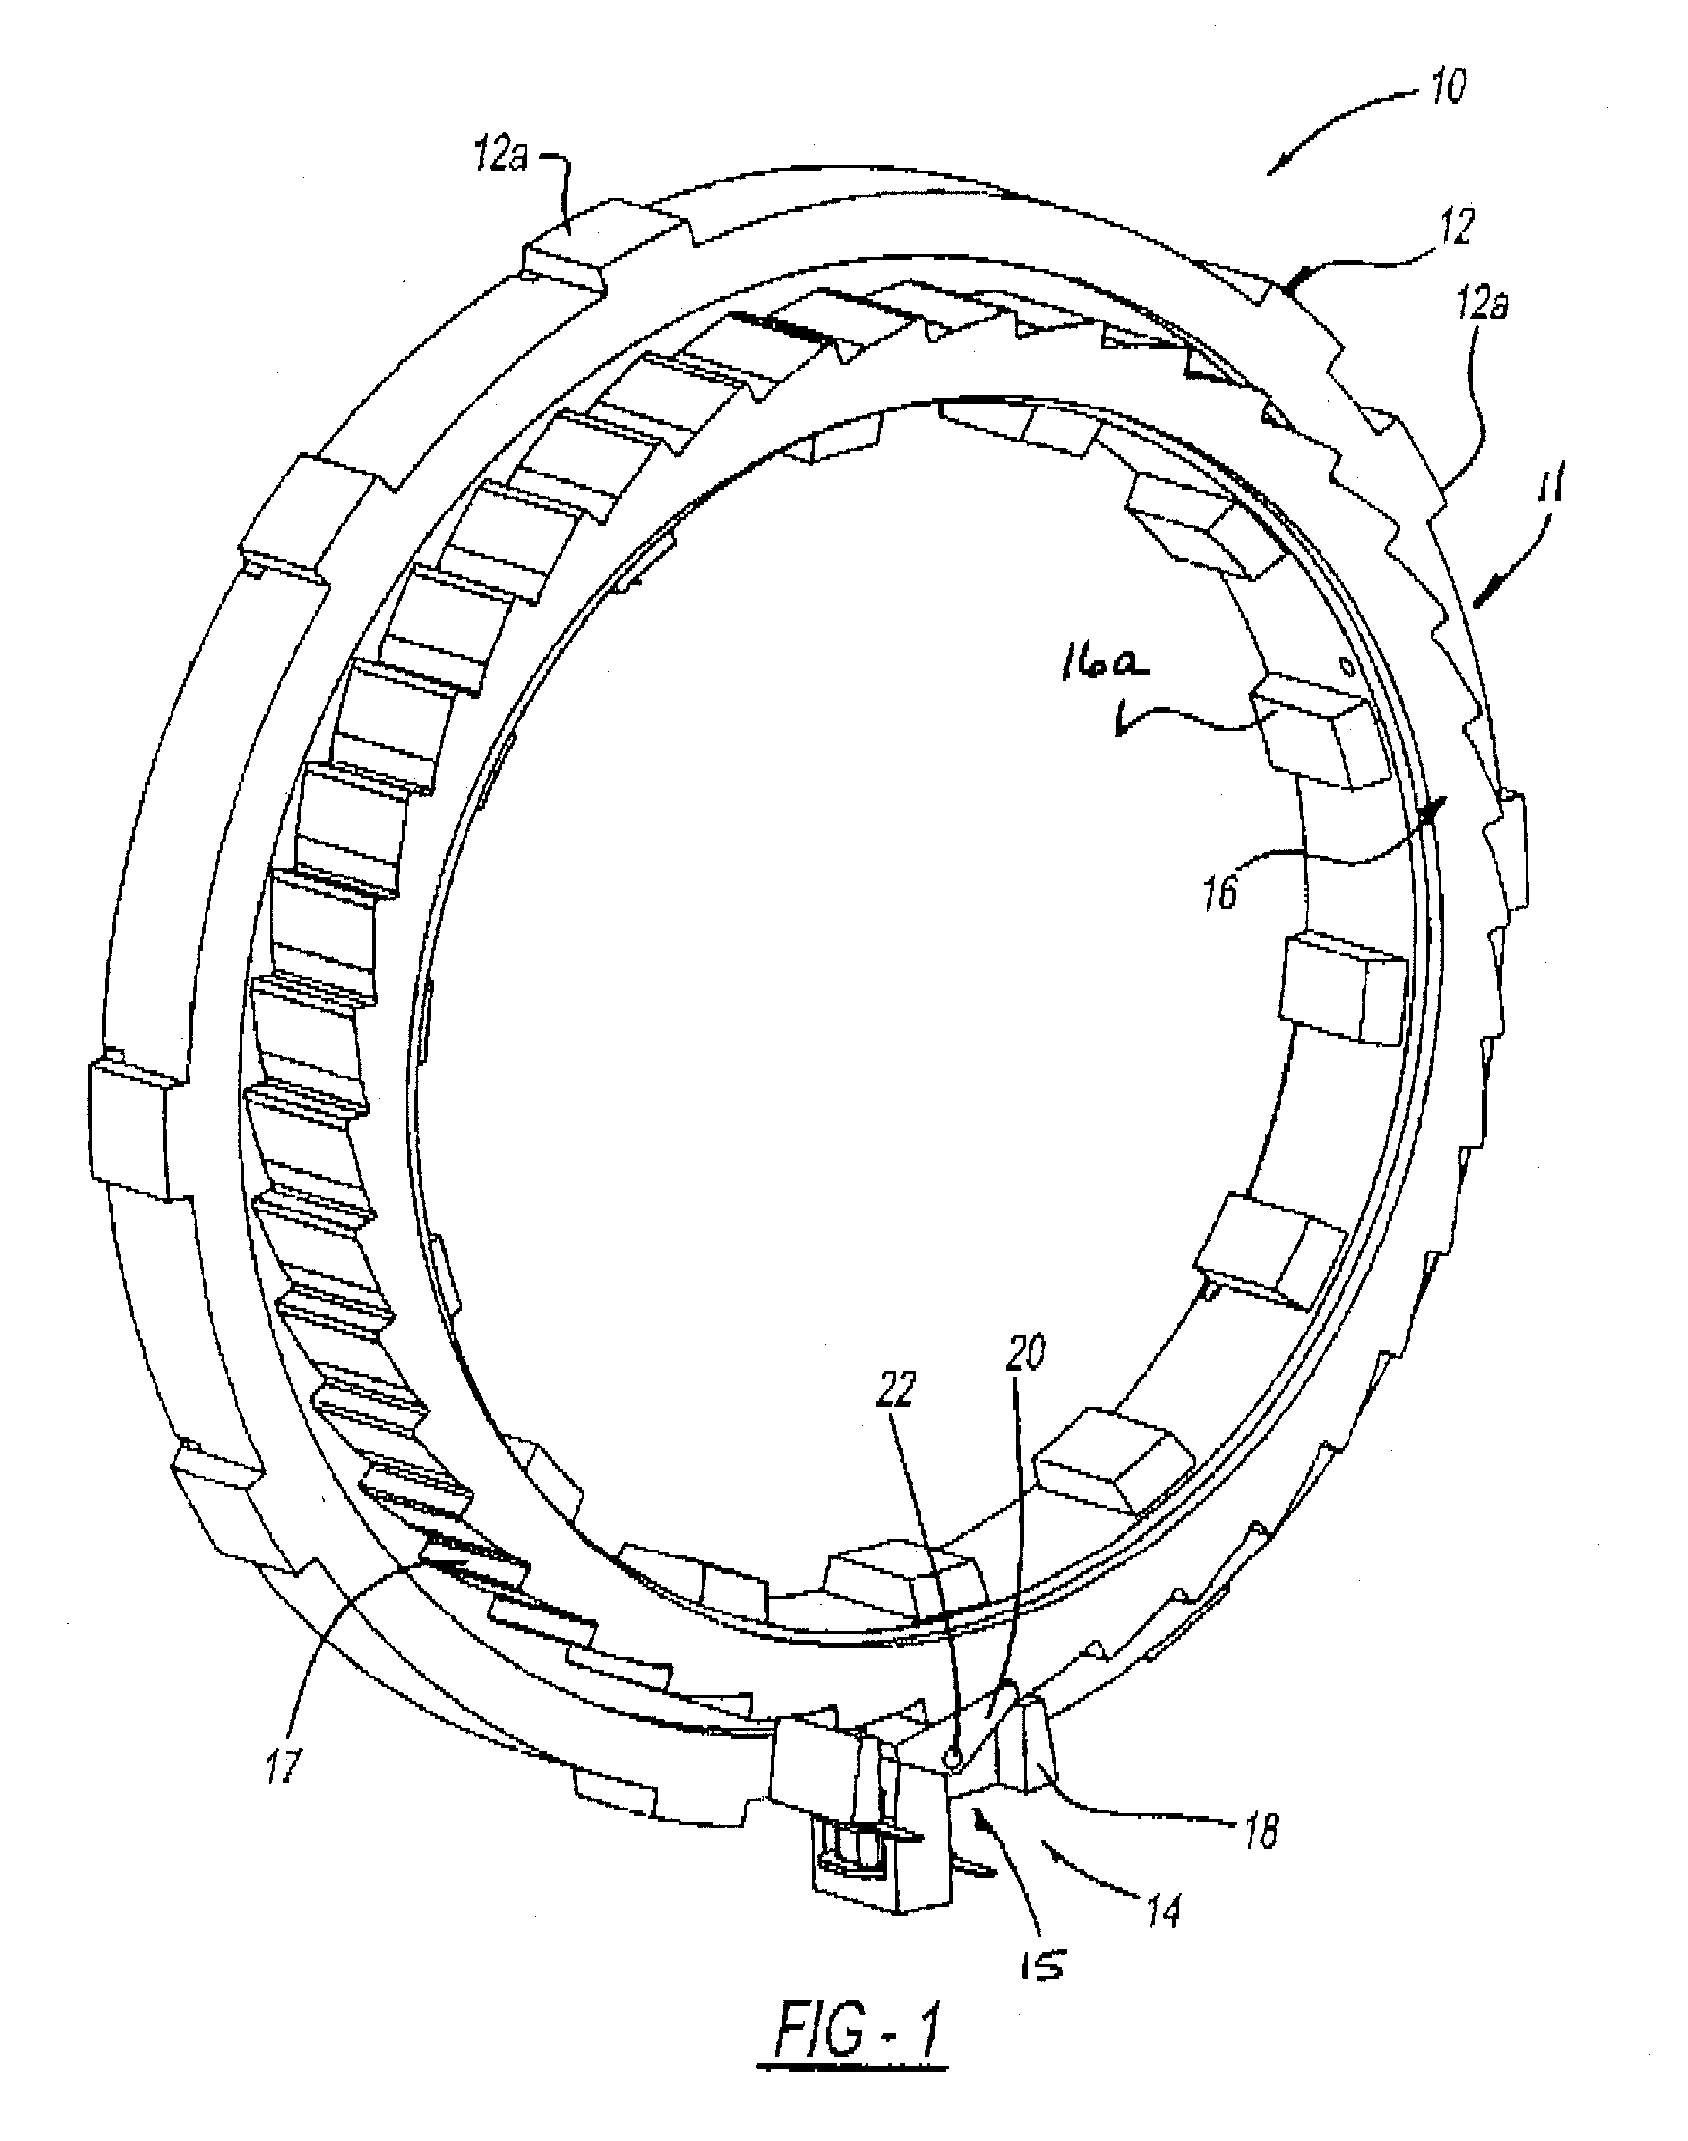 Selectable one-way clutch having strut with separate armature